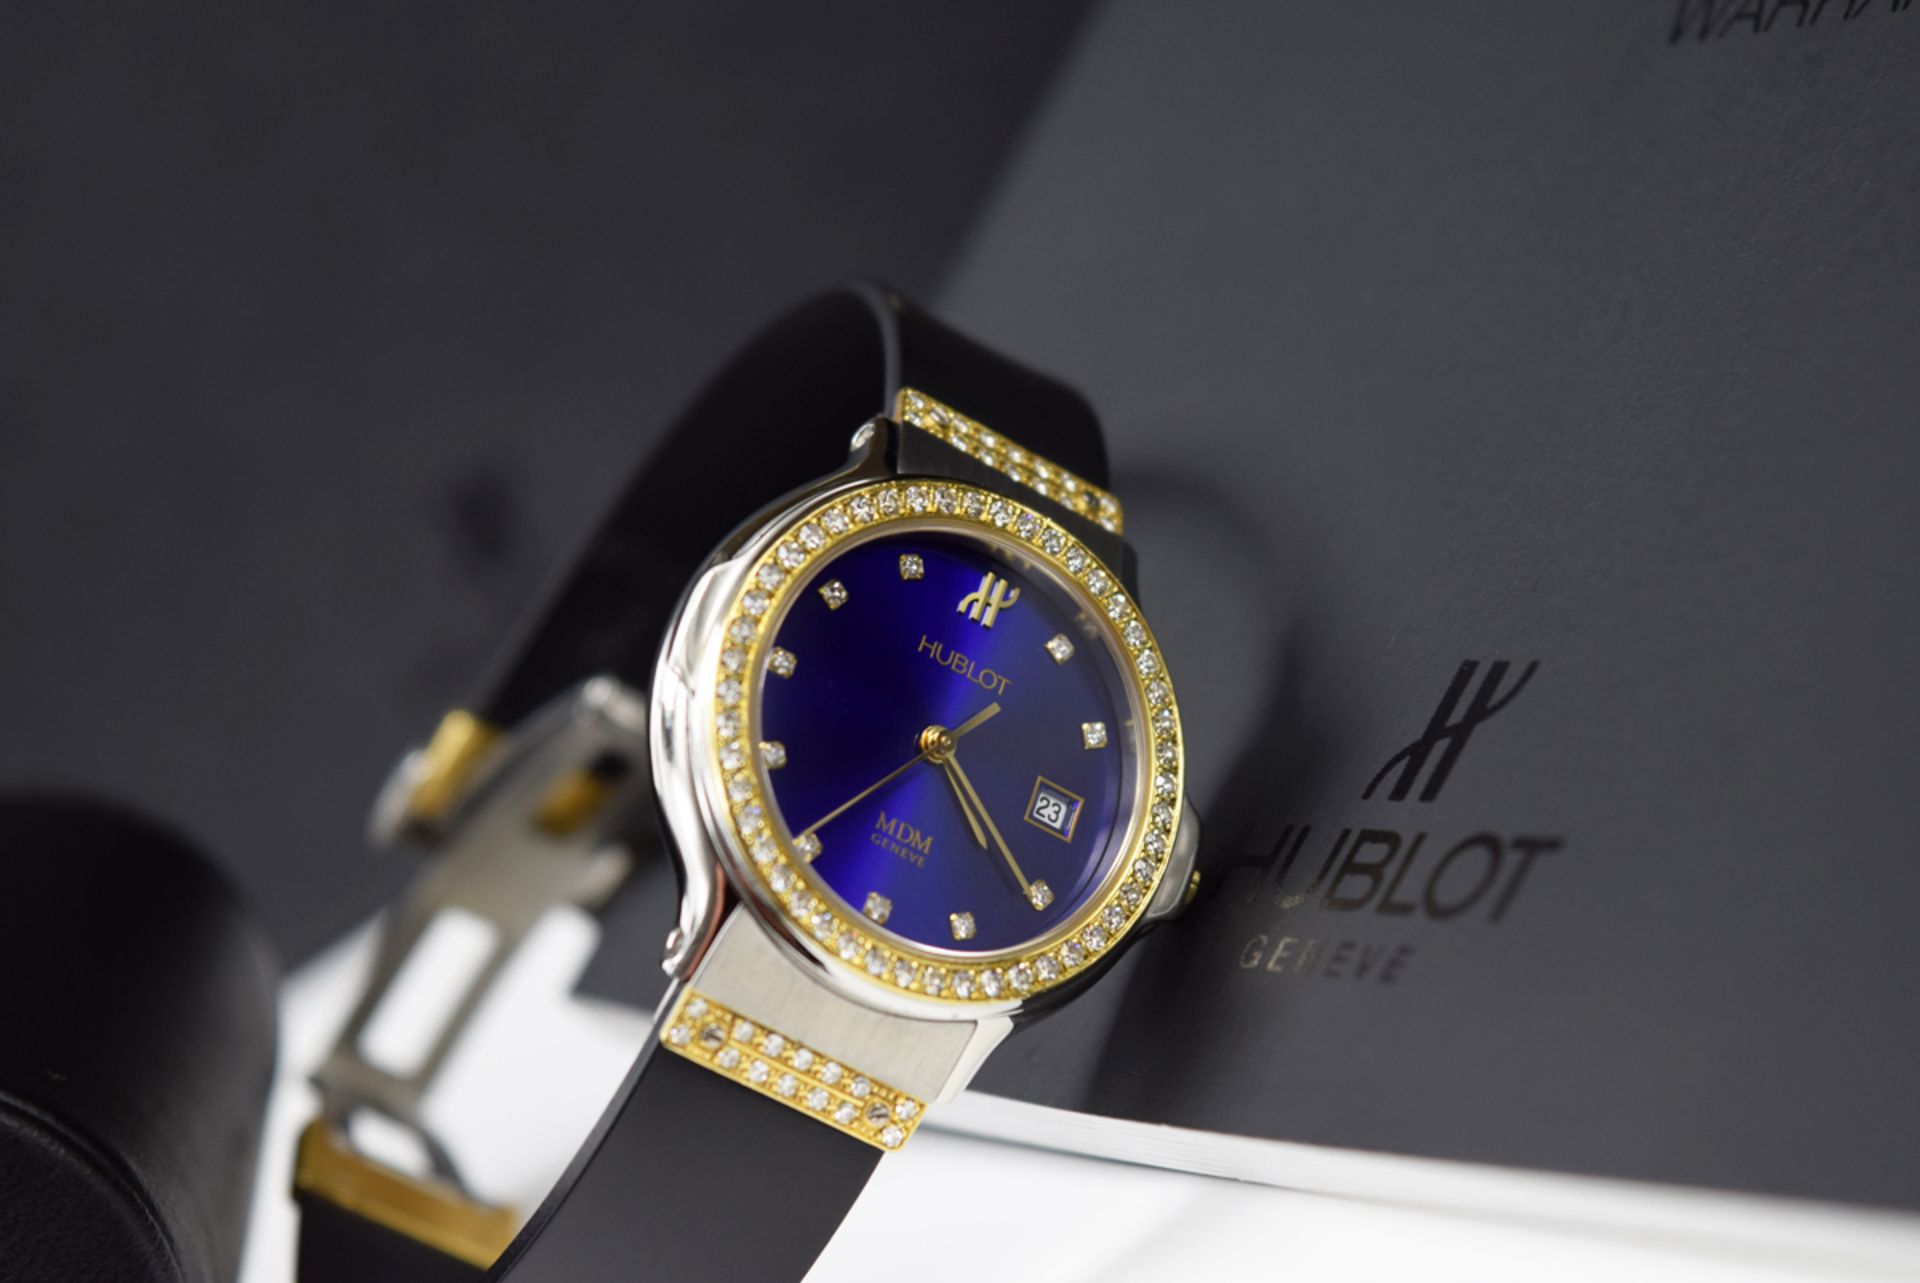 HUBLOT - 'Diamond' Lady Date - Steel and Gold! Gorgeous Blue Dial! - Image 4 of 8